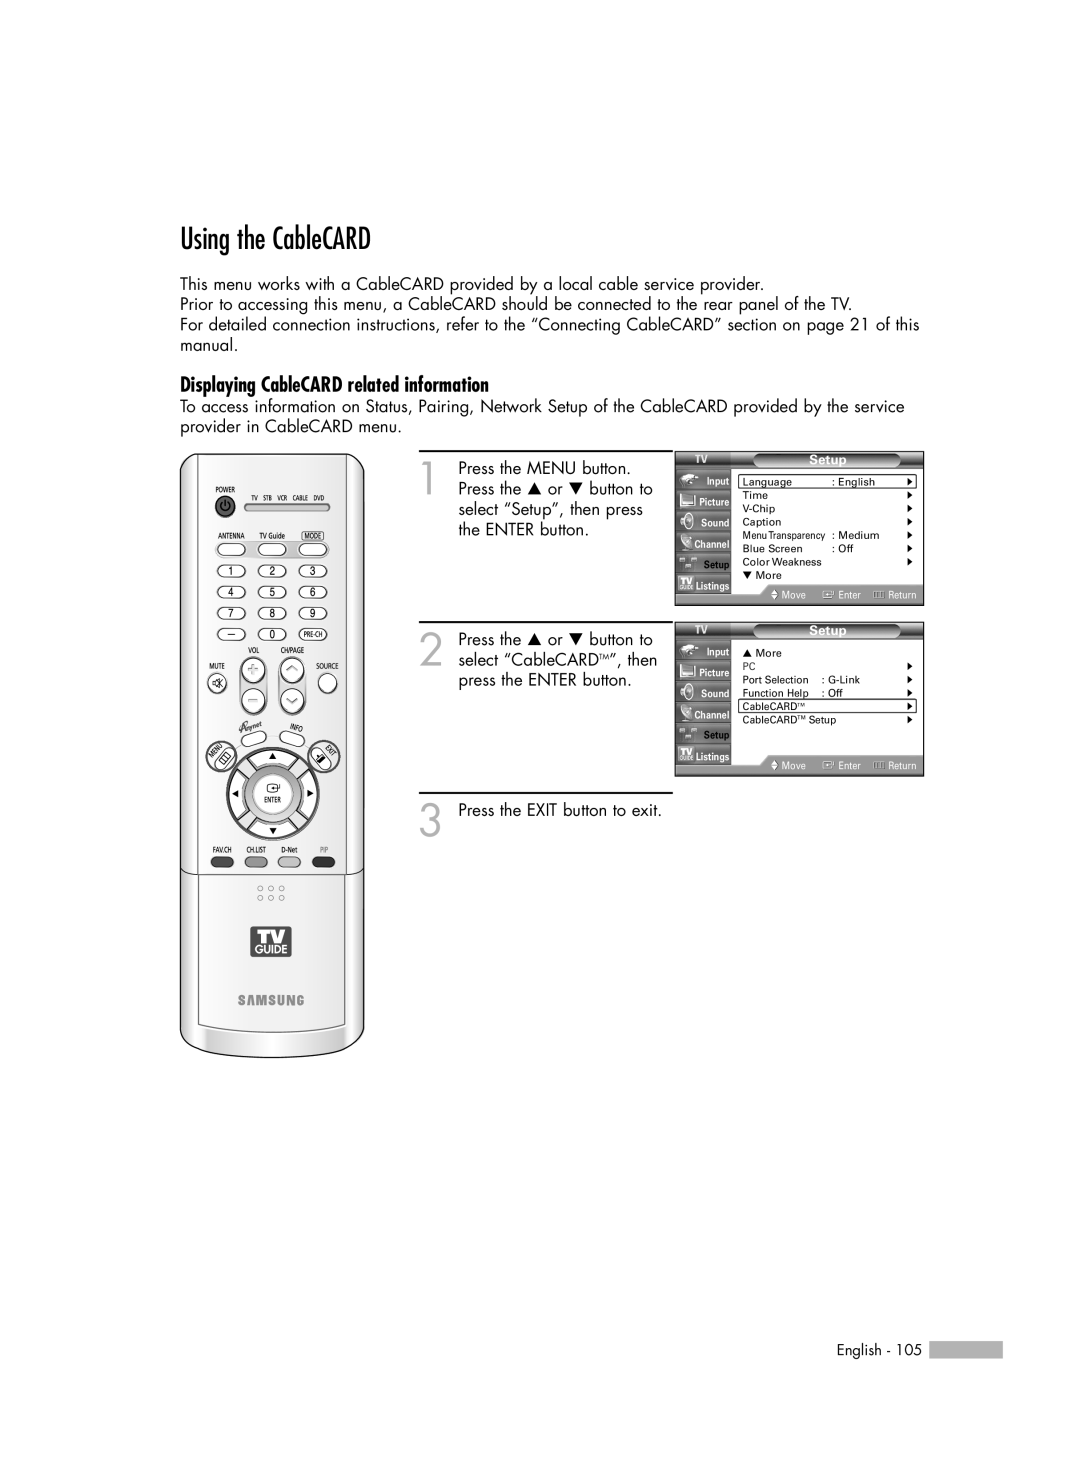 Samsung HL-R5688W manual Using the CableCARD, Displaying CableCARD related information 